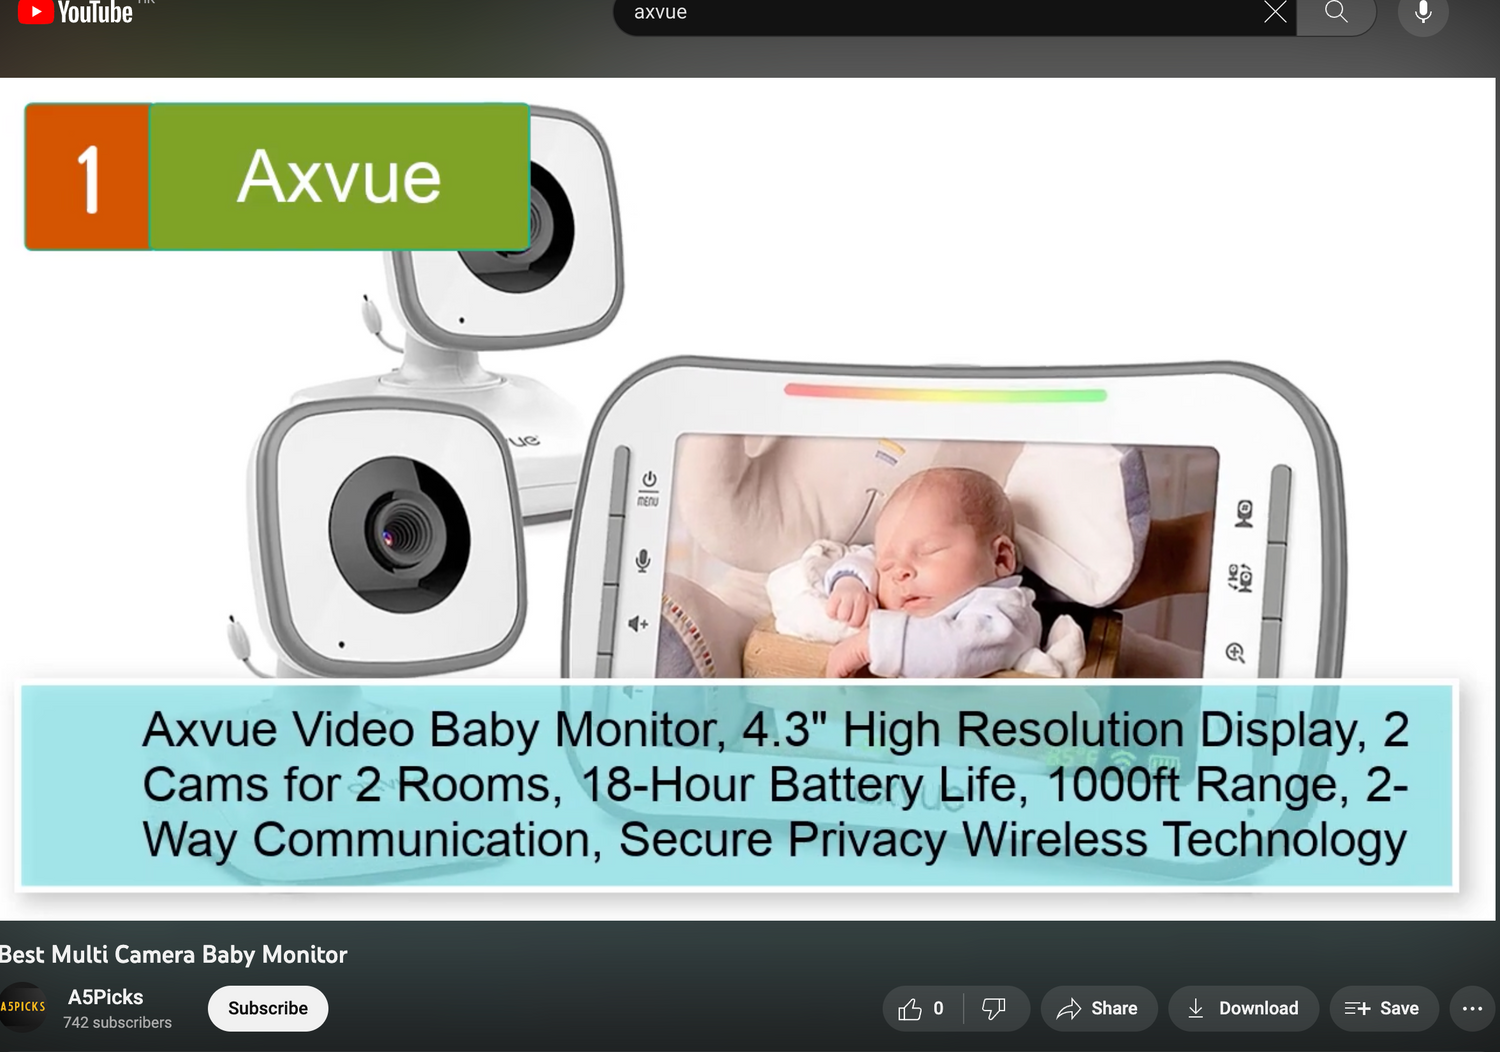 Proudly be selected Number 1 in <Best Multi Camera Baby Monitor>